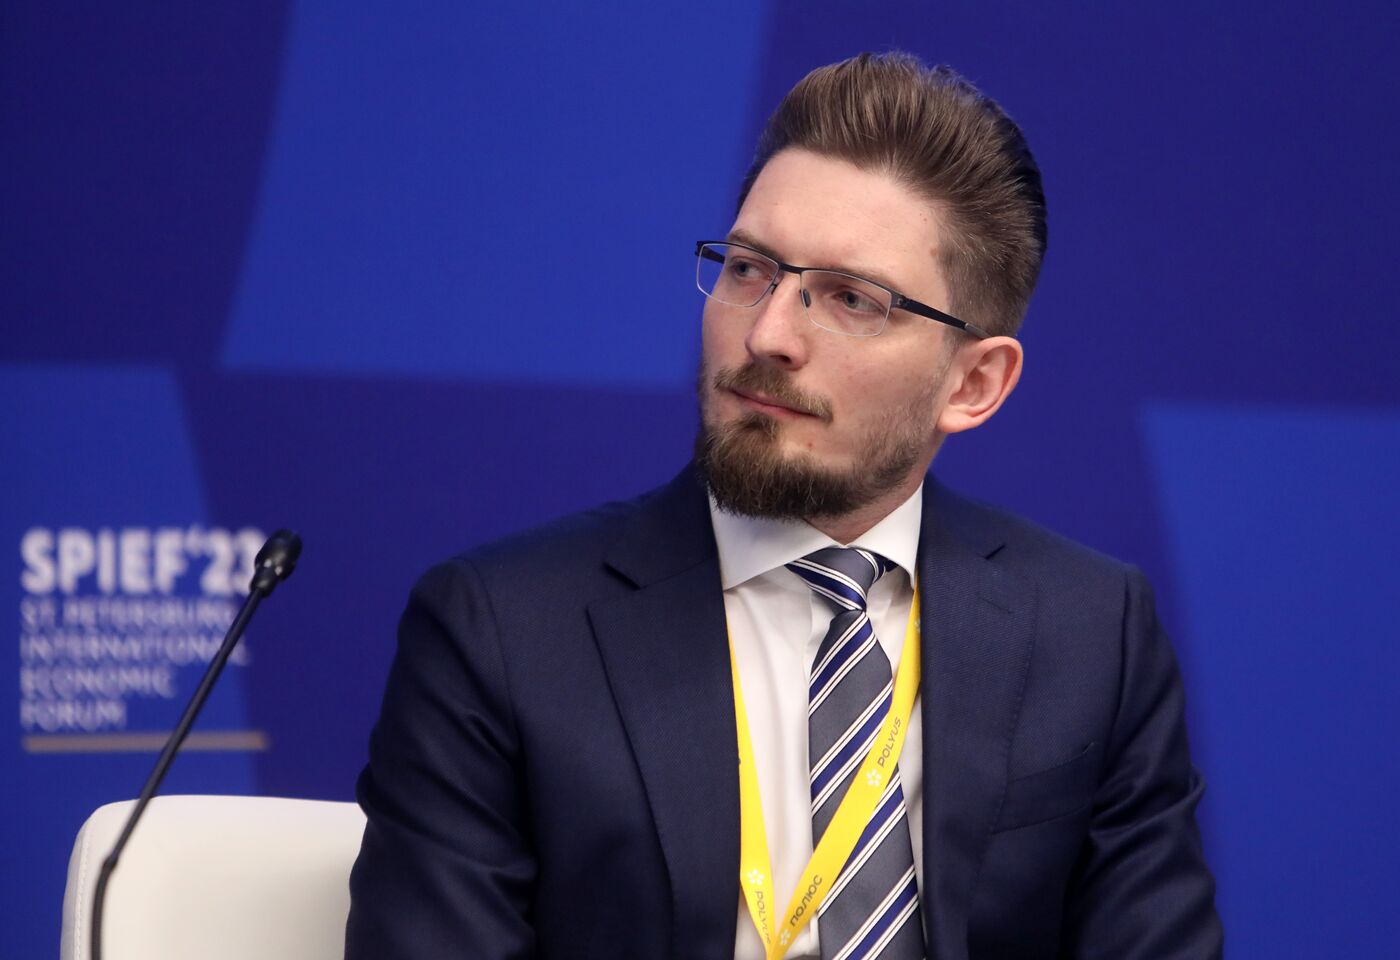 SPIEF-2023. The World’s Wealth: The Role of Subsoil Resource Management in Ensuring Commodity and Technological Sovereignty